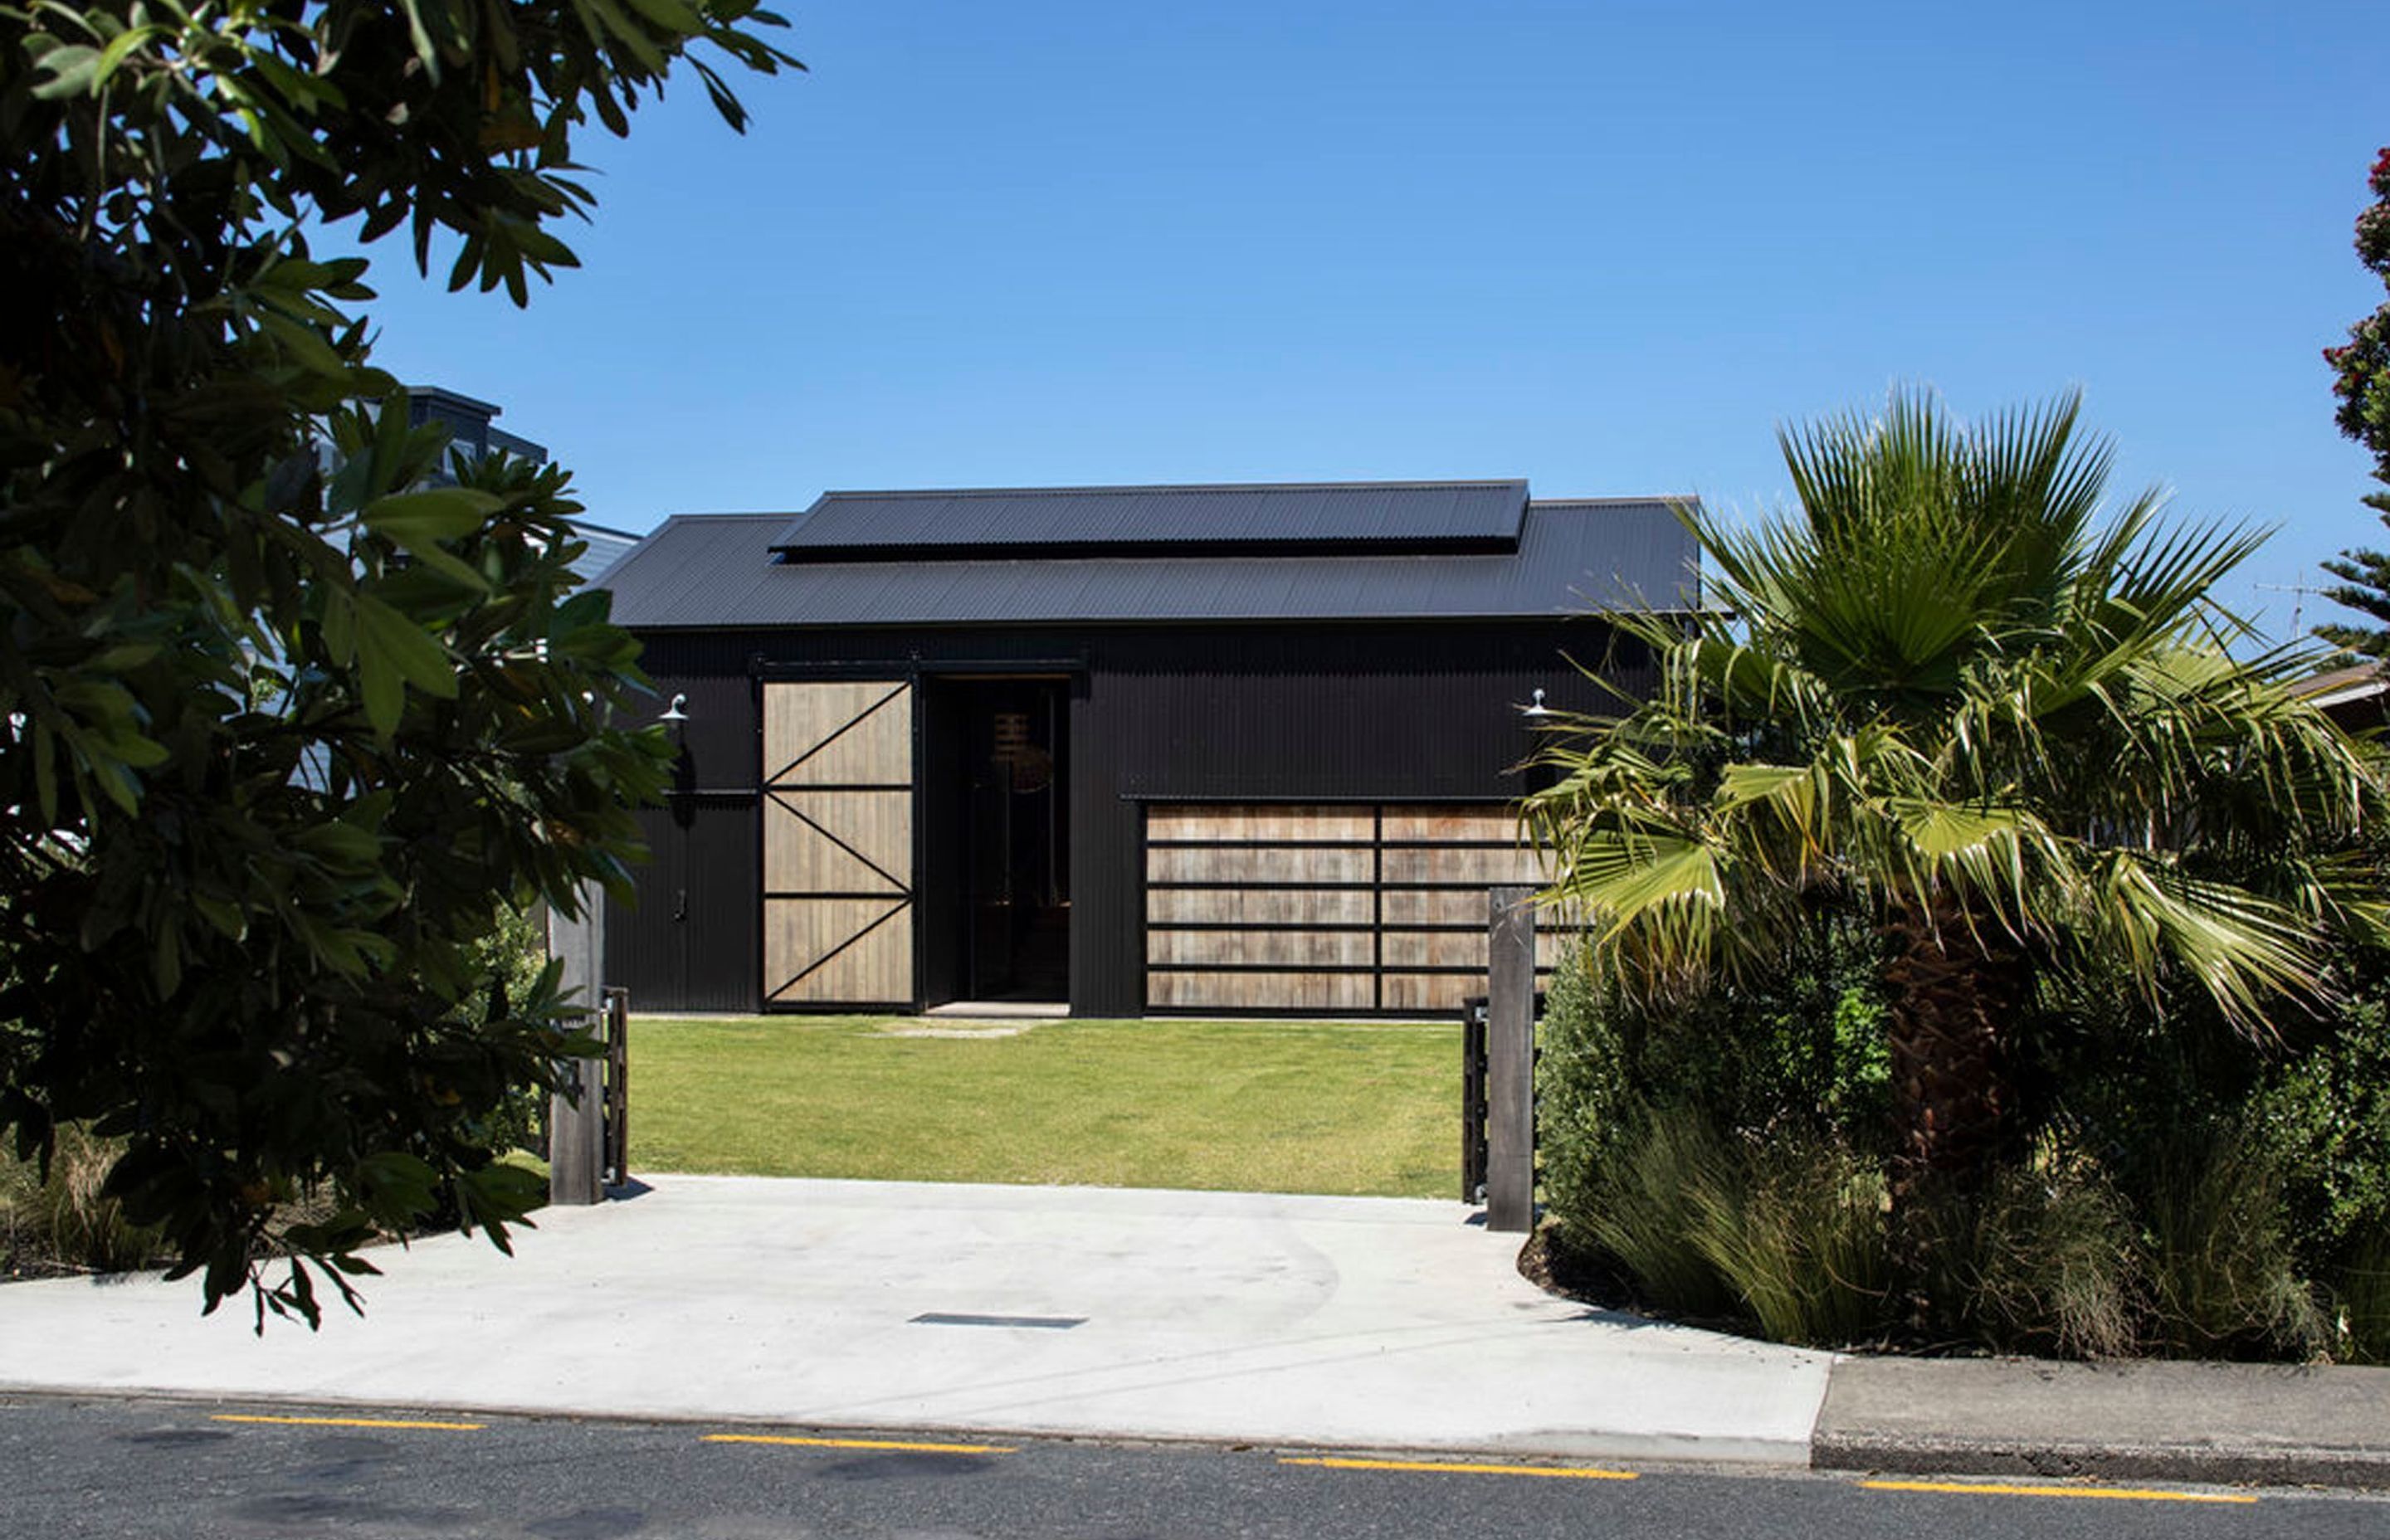 From the road, the house reads as an understated, corrugated-clad shed.